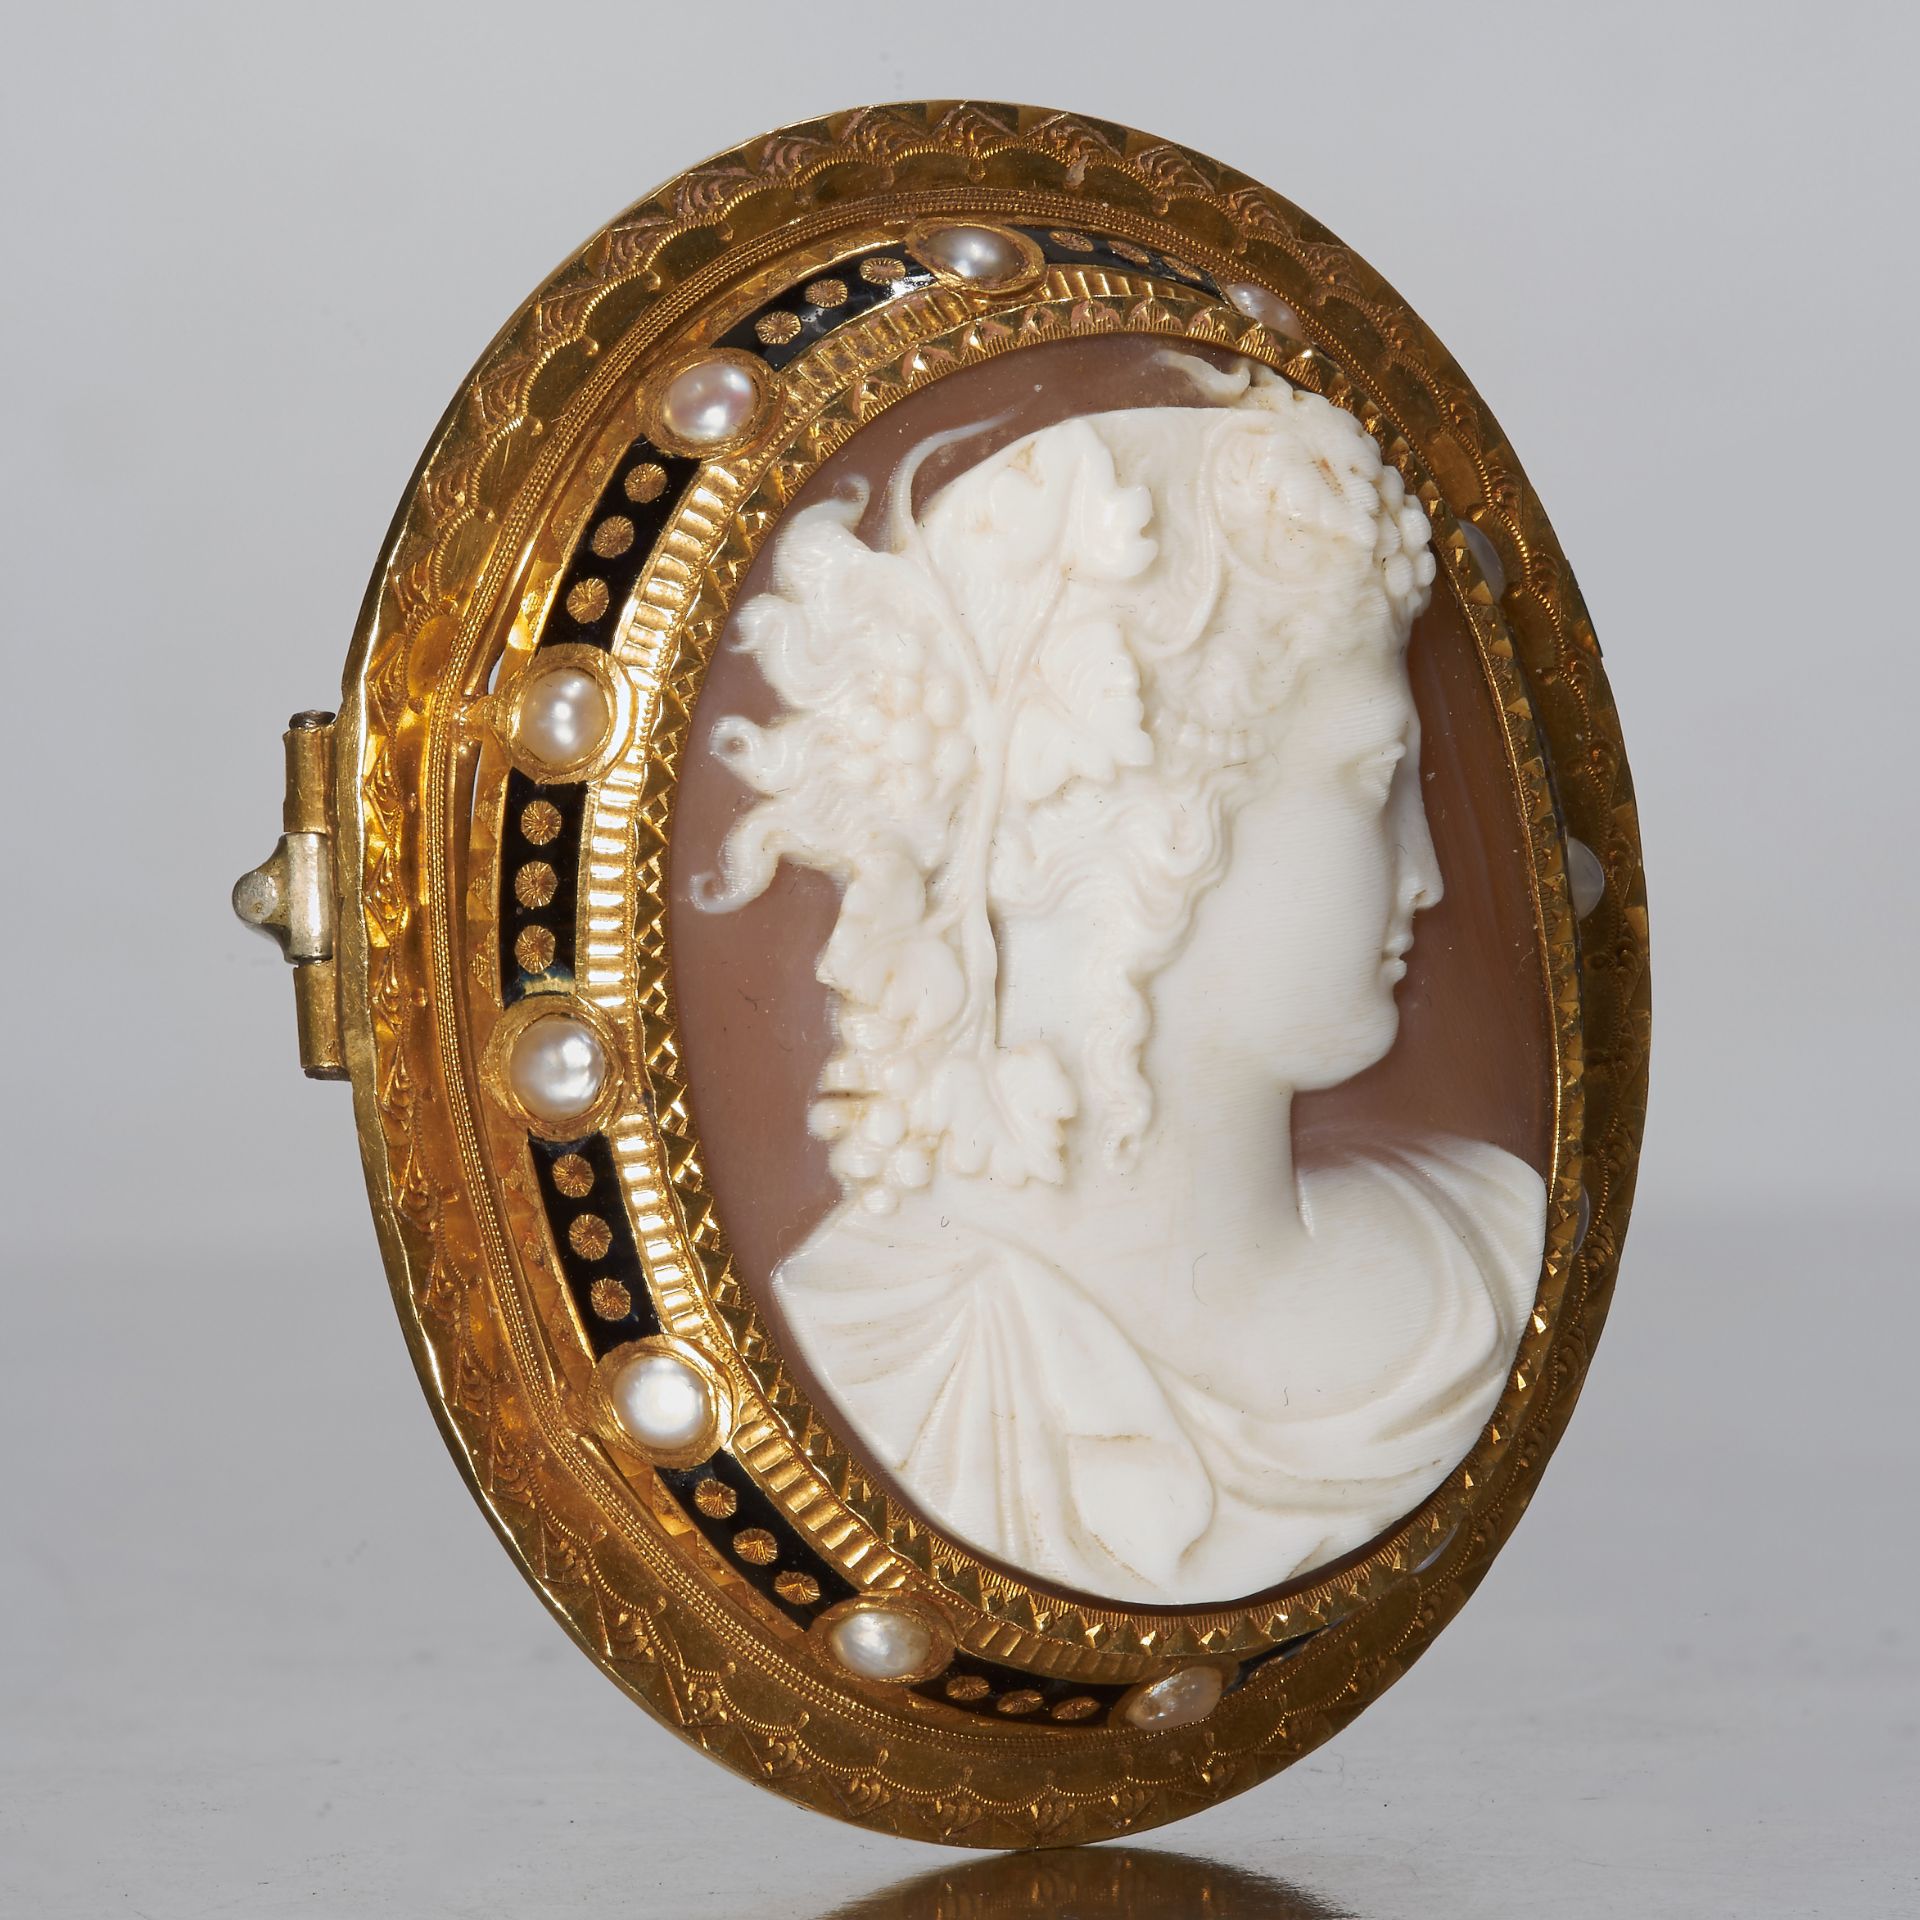 ANTIQUE VICTORIAN CARVED CAMEO AND ENAMEL BROOCH - Image 2 of 2